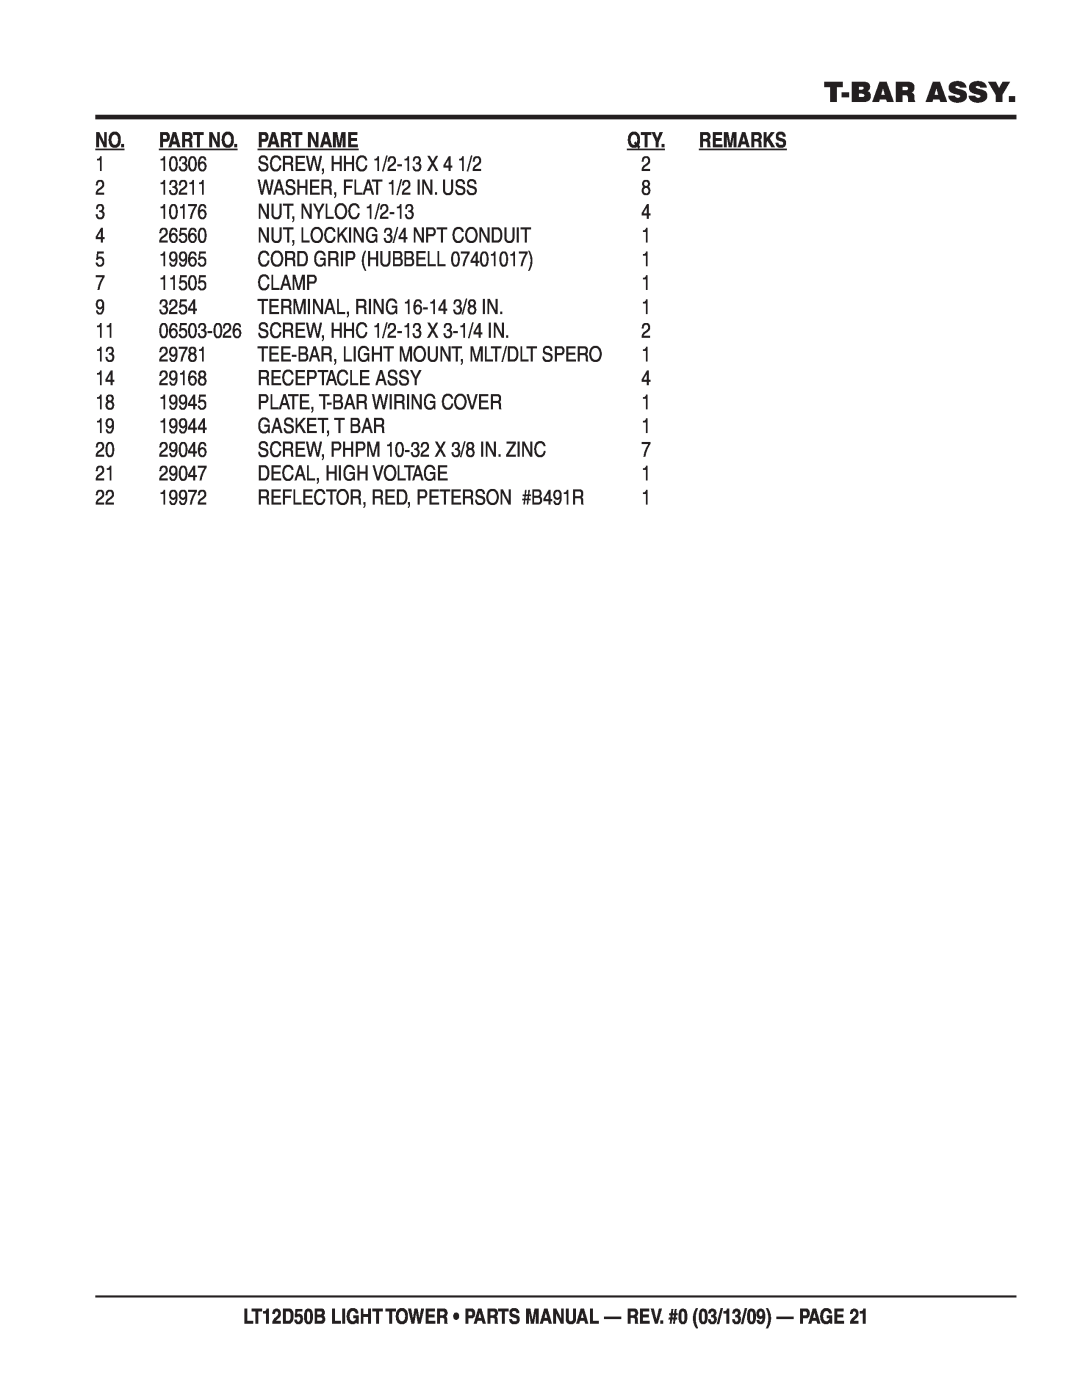 Multiquip manual T-Bar Assy, Part Name, Qty. Remarks, LT12D50B LIGHT TOWER PARTS MANUAL - REV. #0 03/13/09 - PAGE 